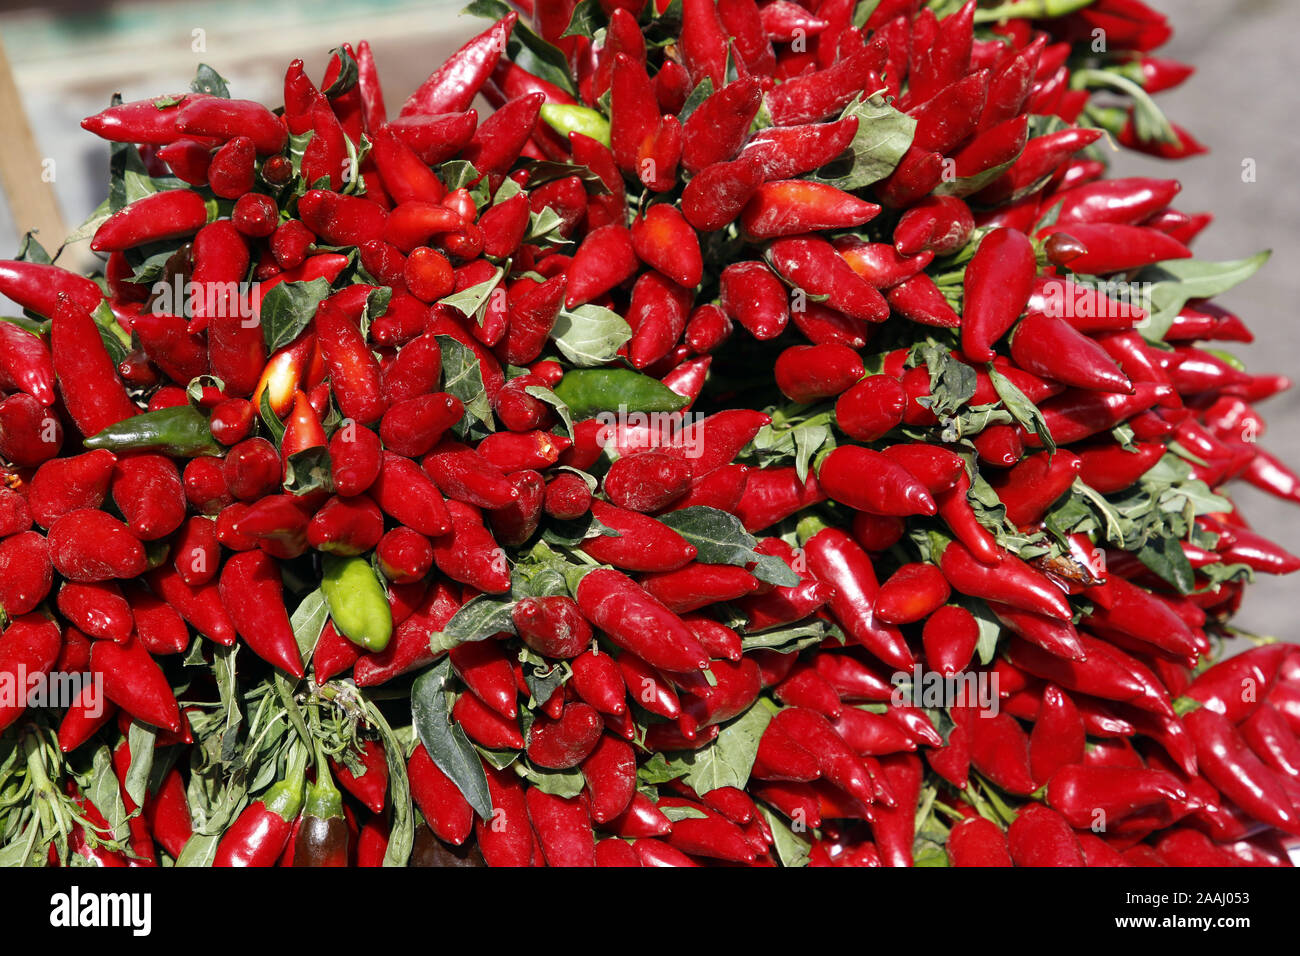 Hot Red Chilli Peppers on sale in Palermo Market, Sicily Stock Photo